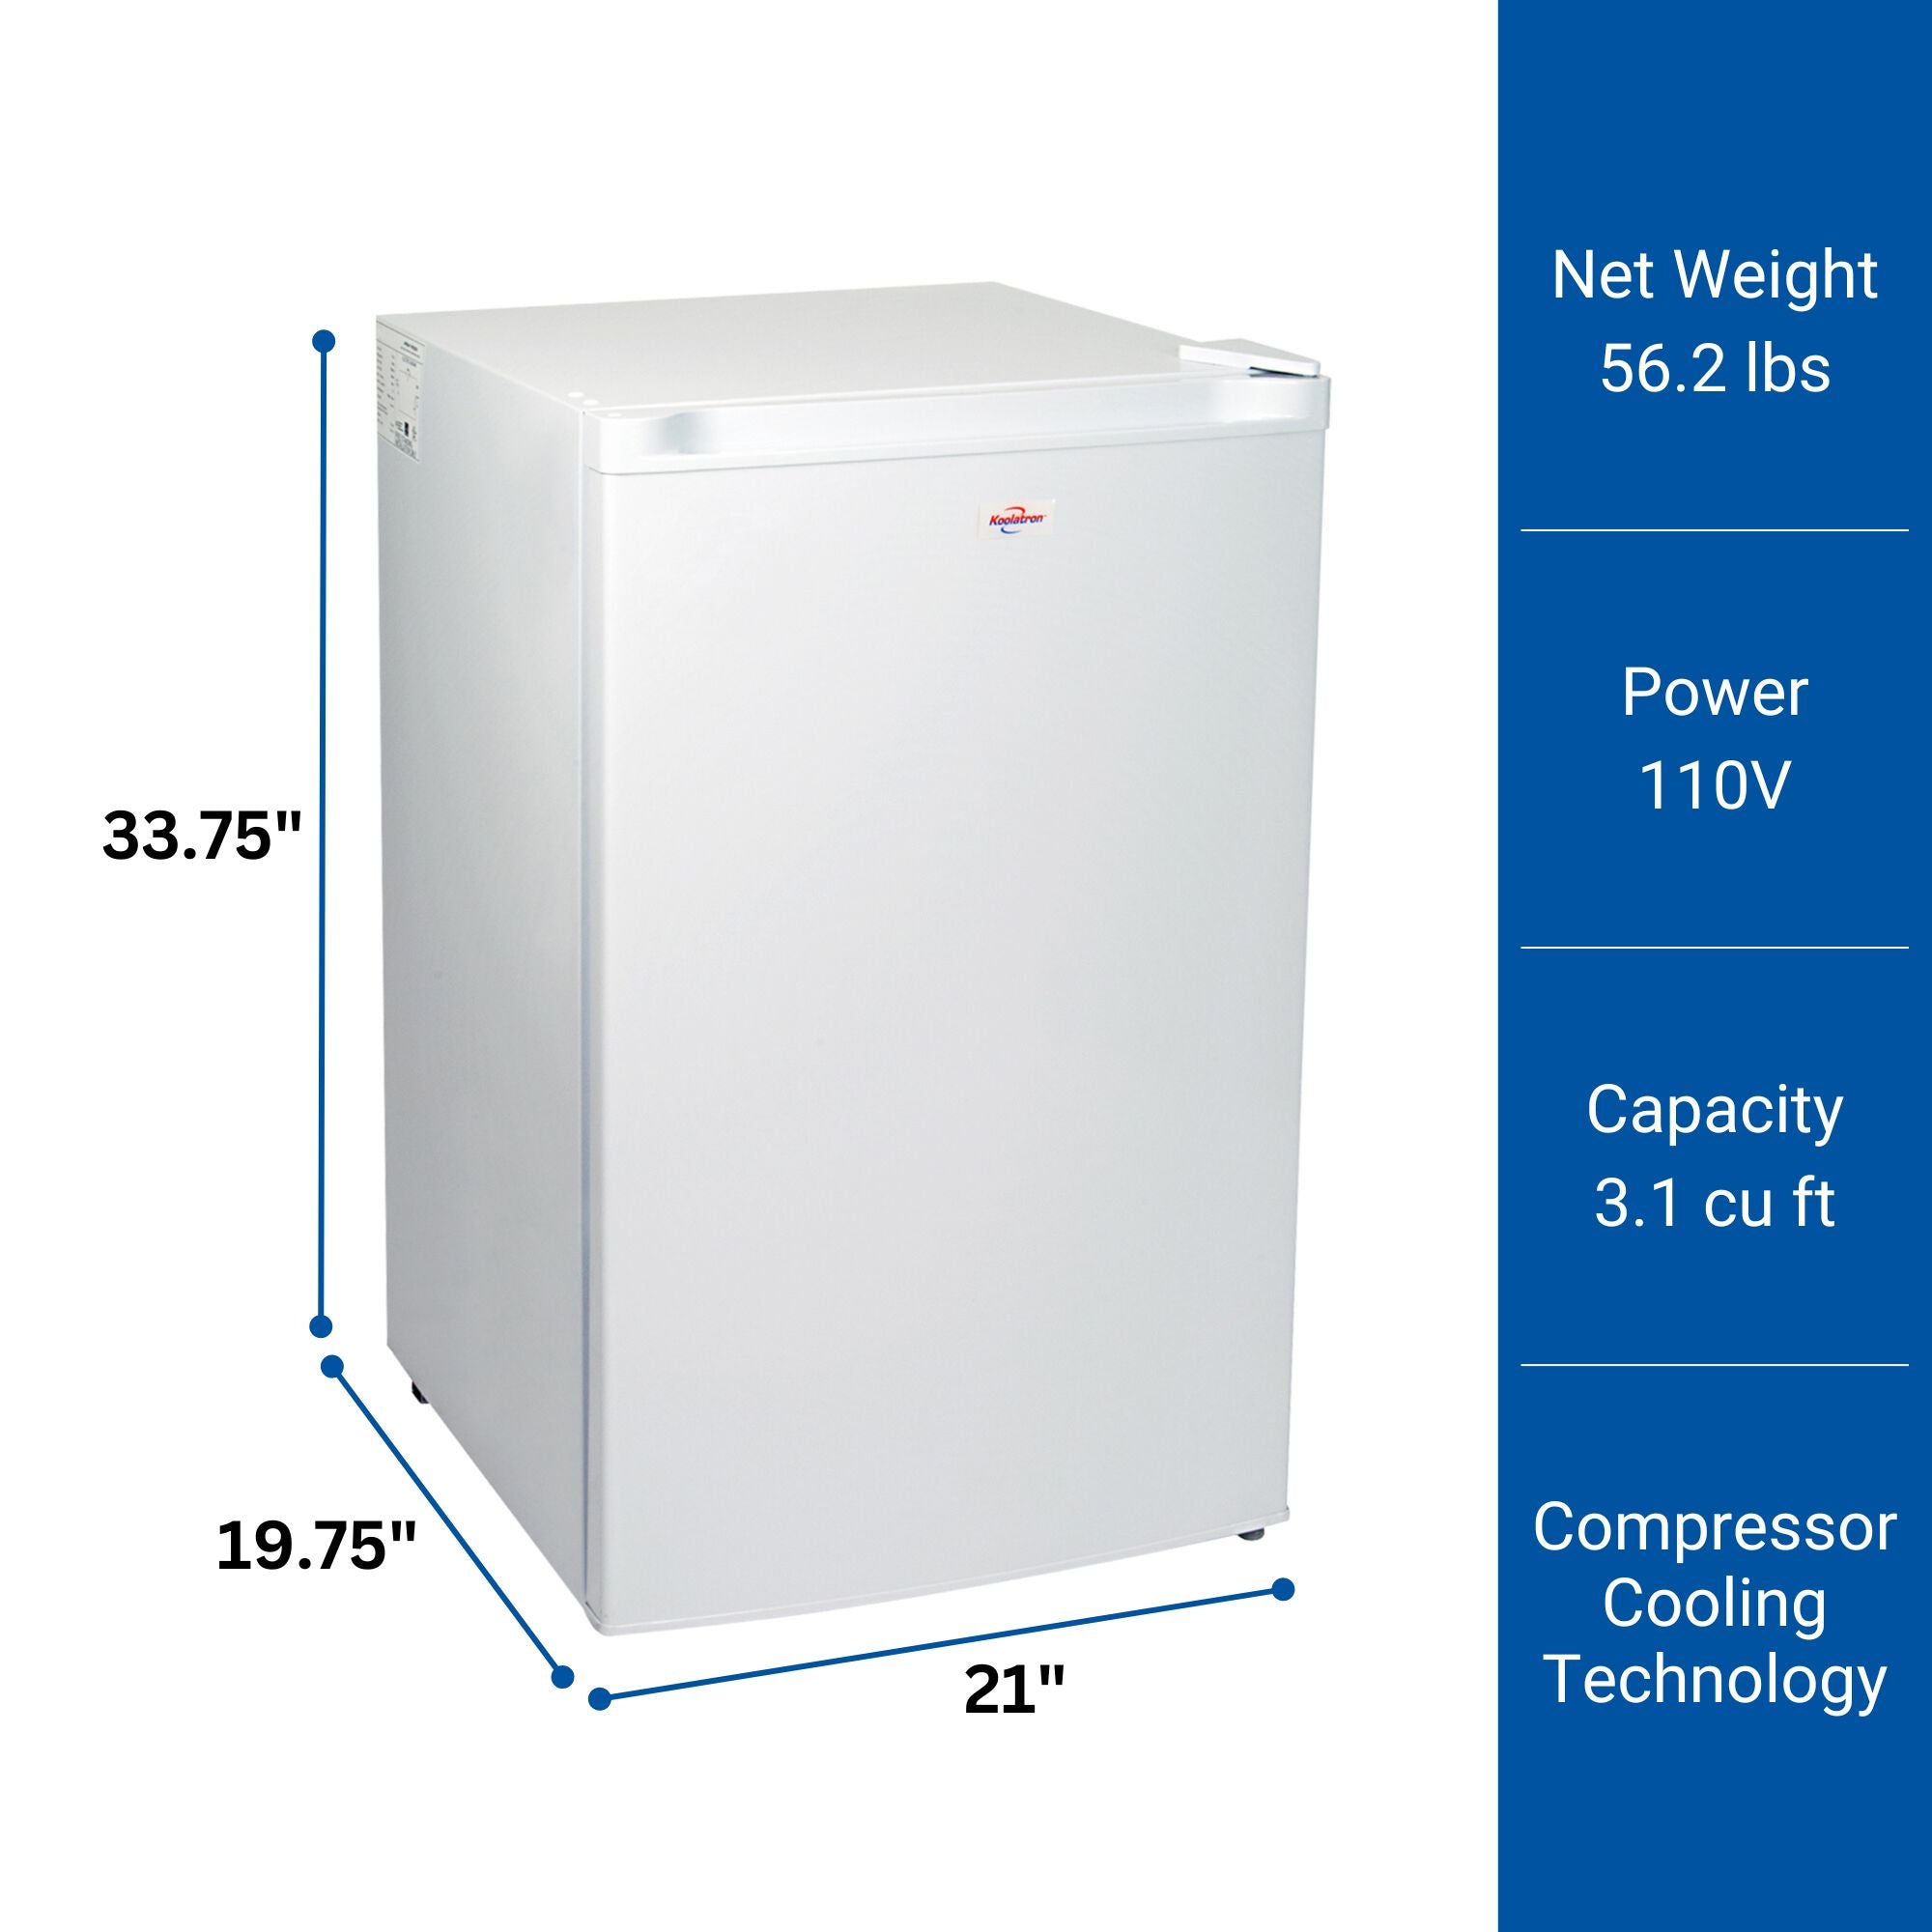  Product shot of white upright freezer with dimensions labeled on the left. Text to the right reads, "Net weight 56.2 lbs; Power 110V; Capacity 3.1 cu ft; Compressor cooling technology"